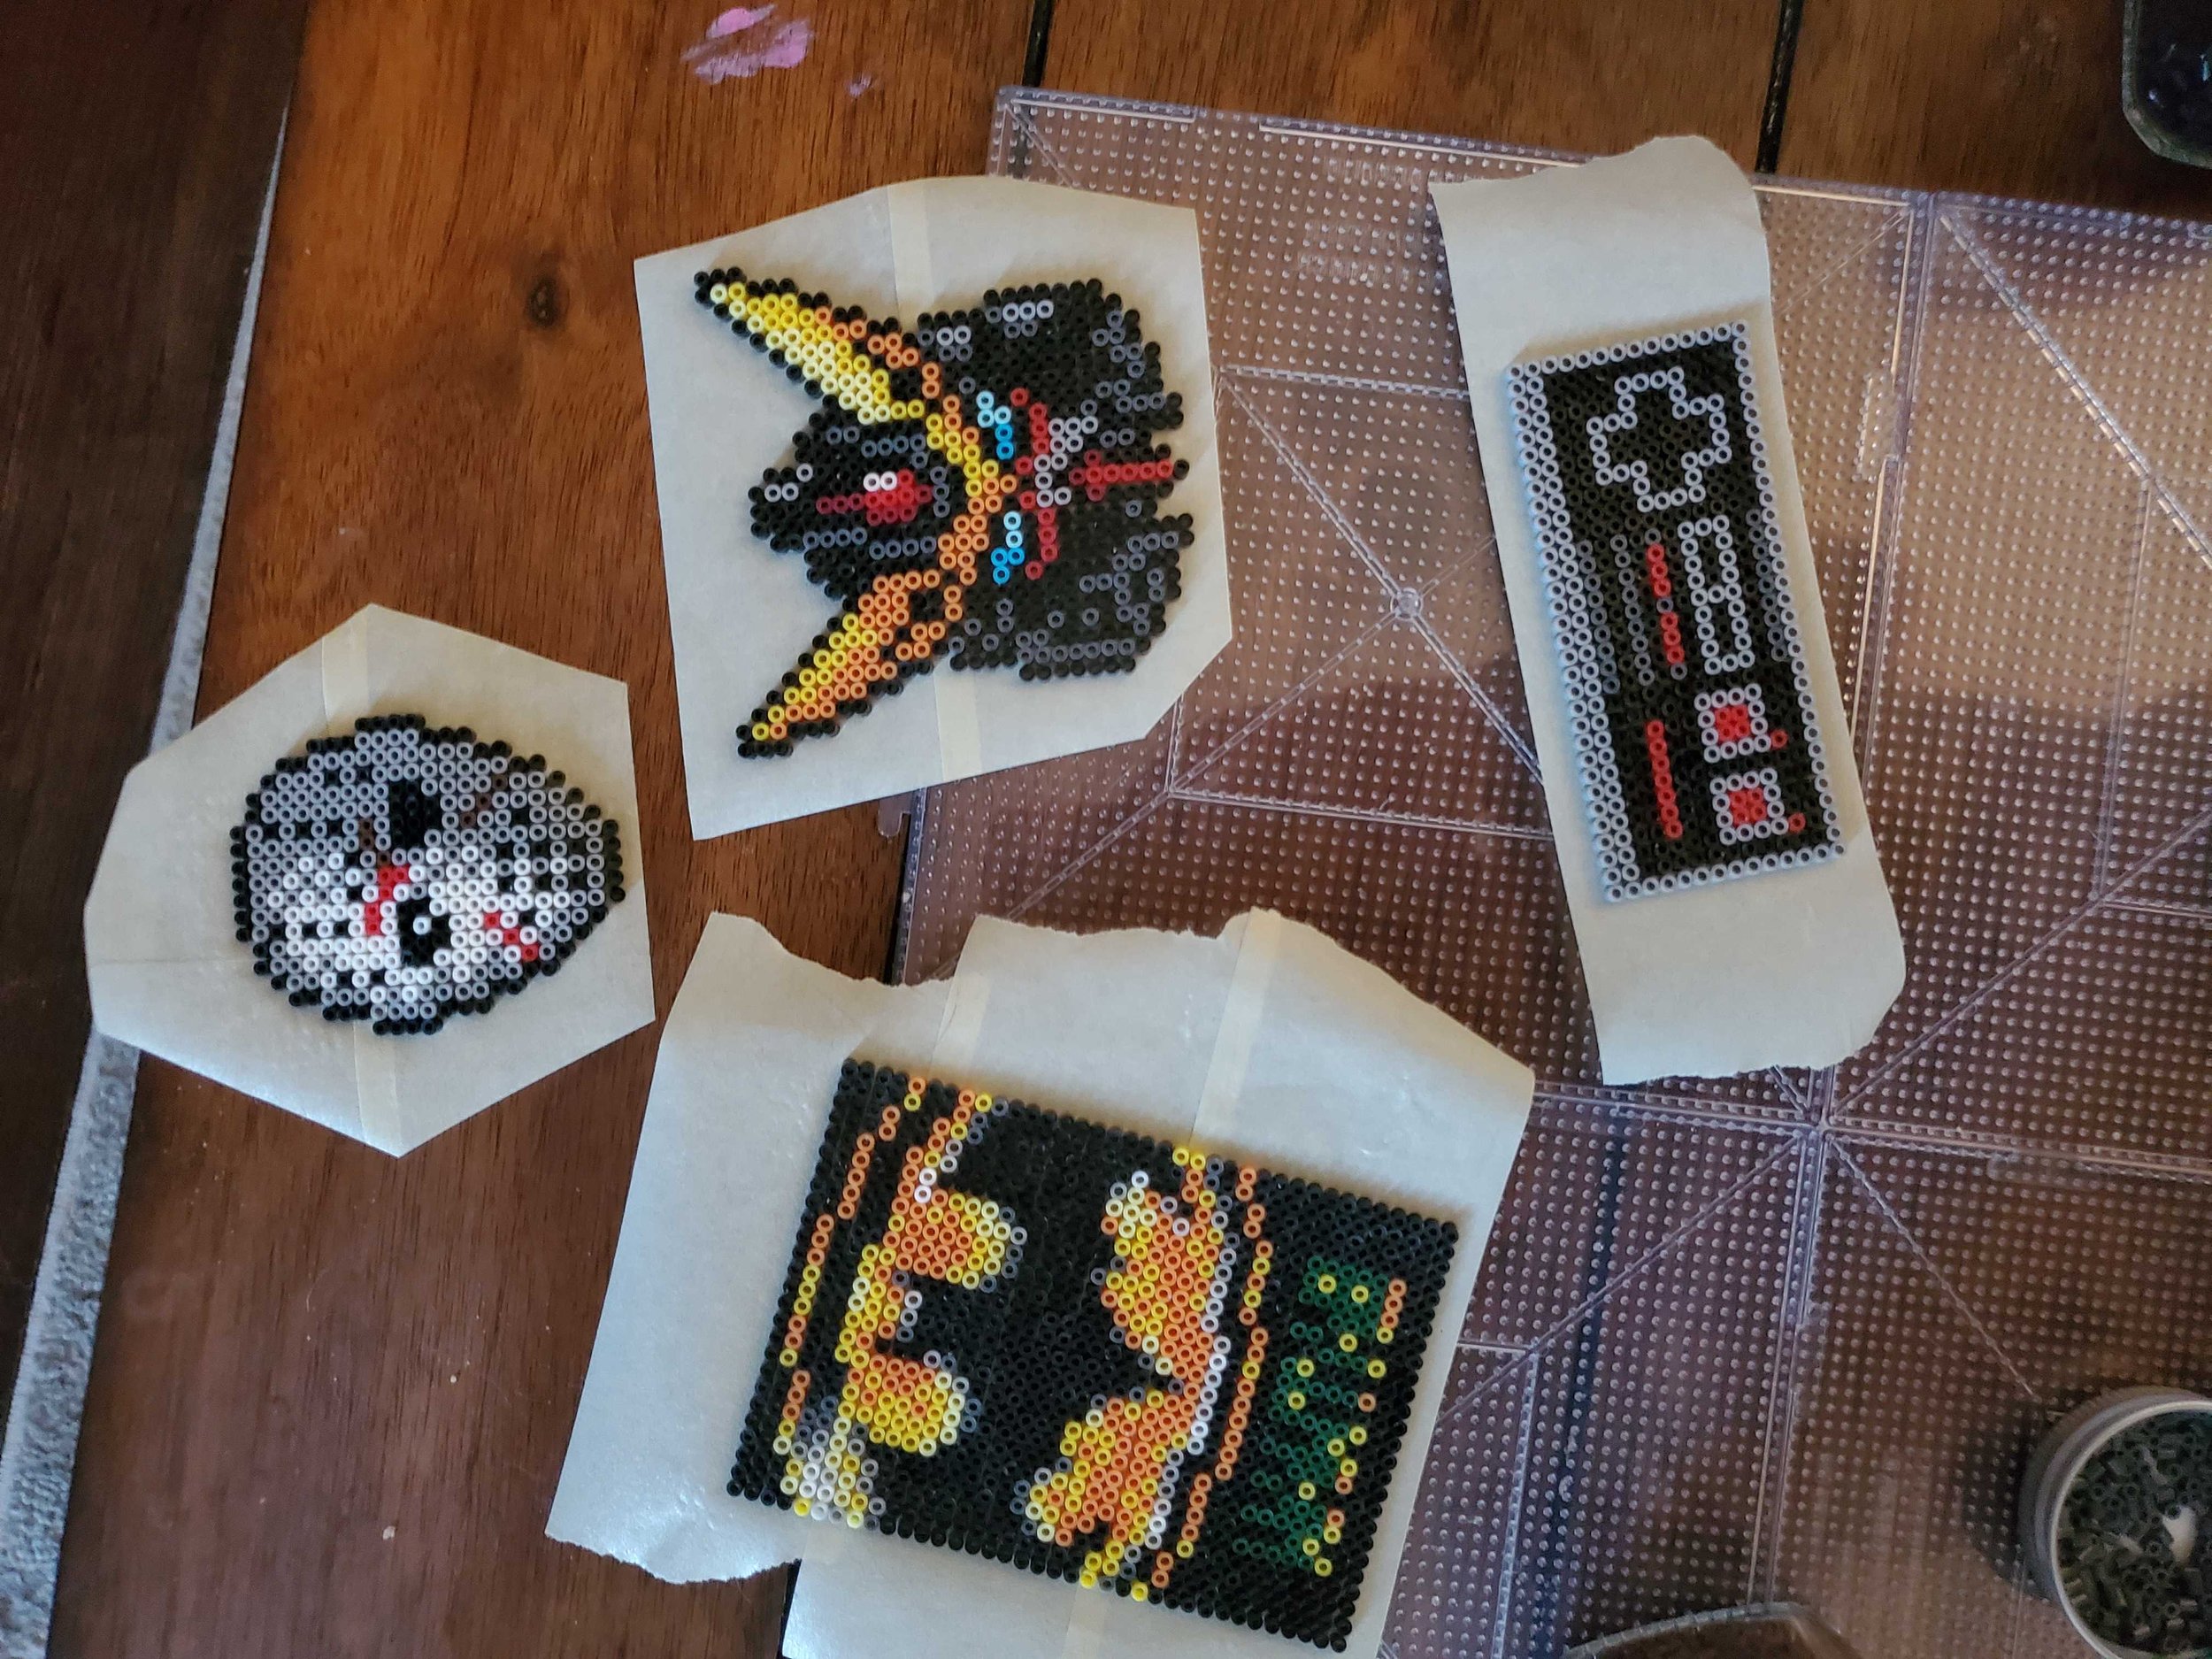 The Do's and Do not's of Perler beads on Tumblr: Stop over ironing